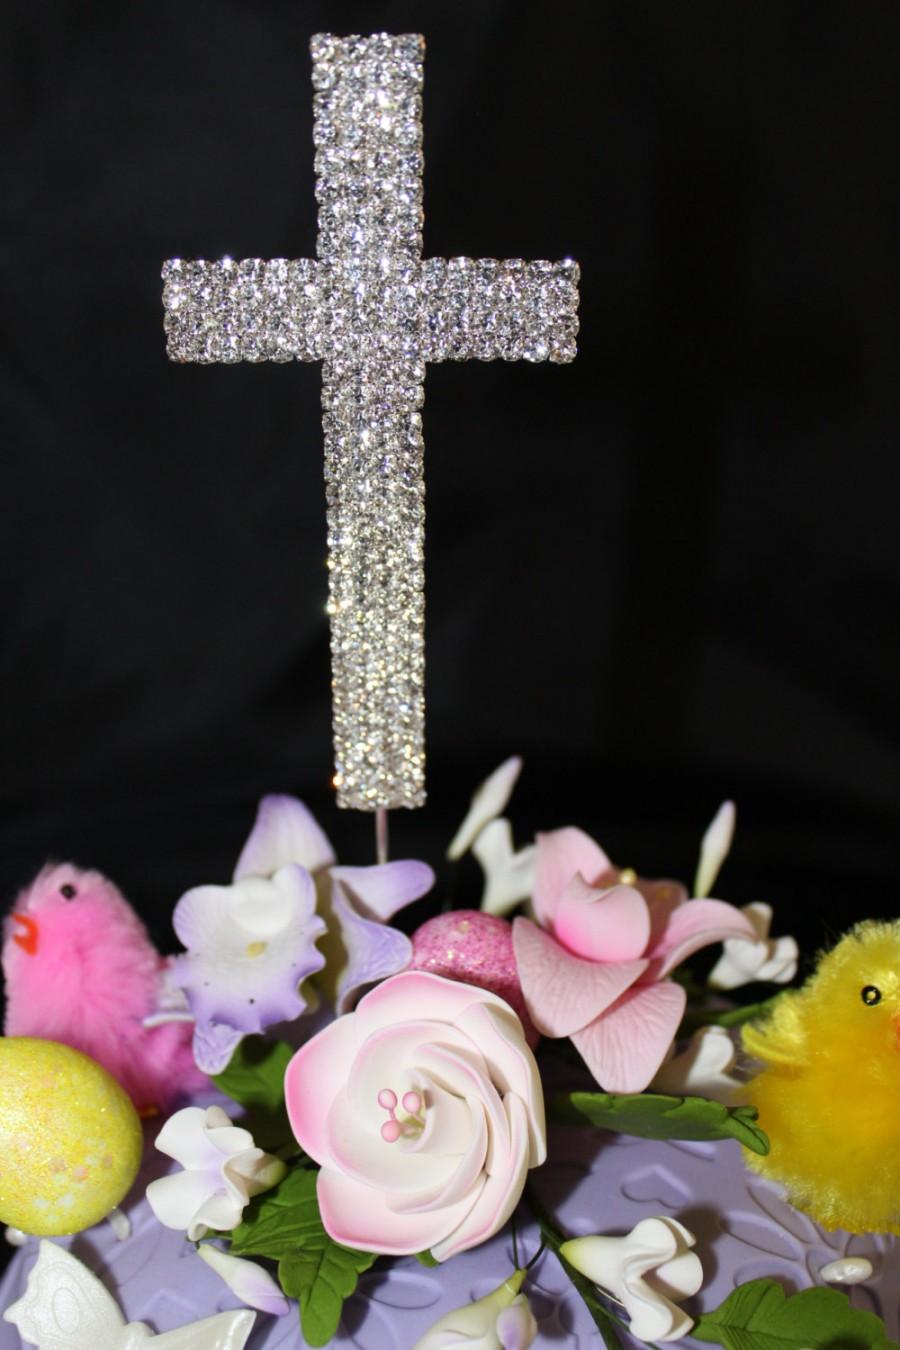 Hochzeit - CROSS CAKE TOPPER Rhinestone Cross, various styles,Floral Stick - Great for Baptisms,Communion, Easter, Weddings, Holidays 5"Cross,Total 10"